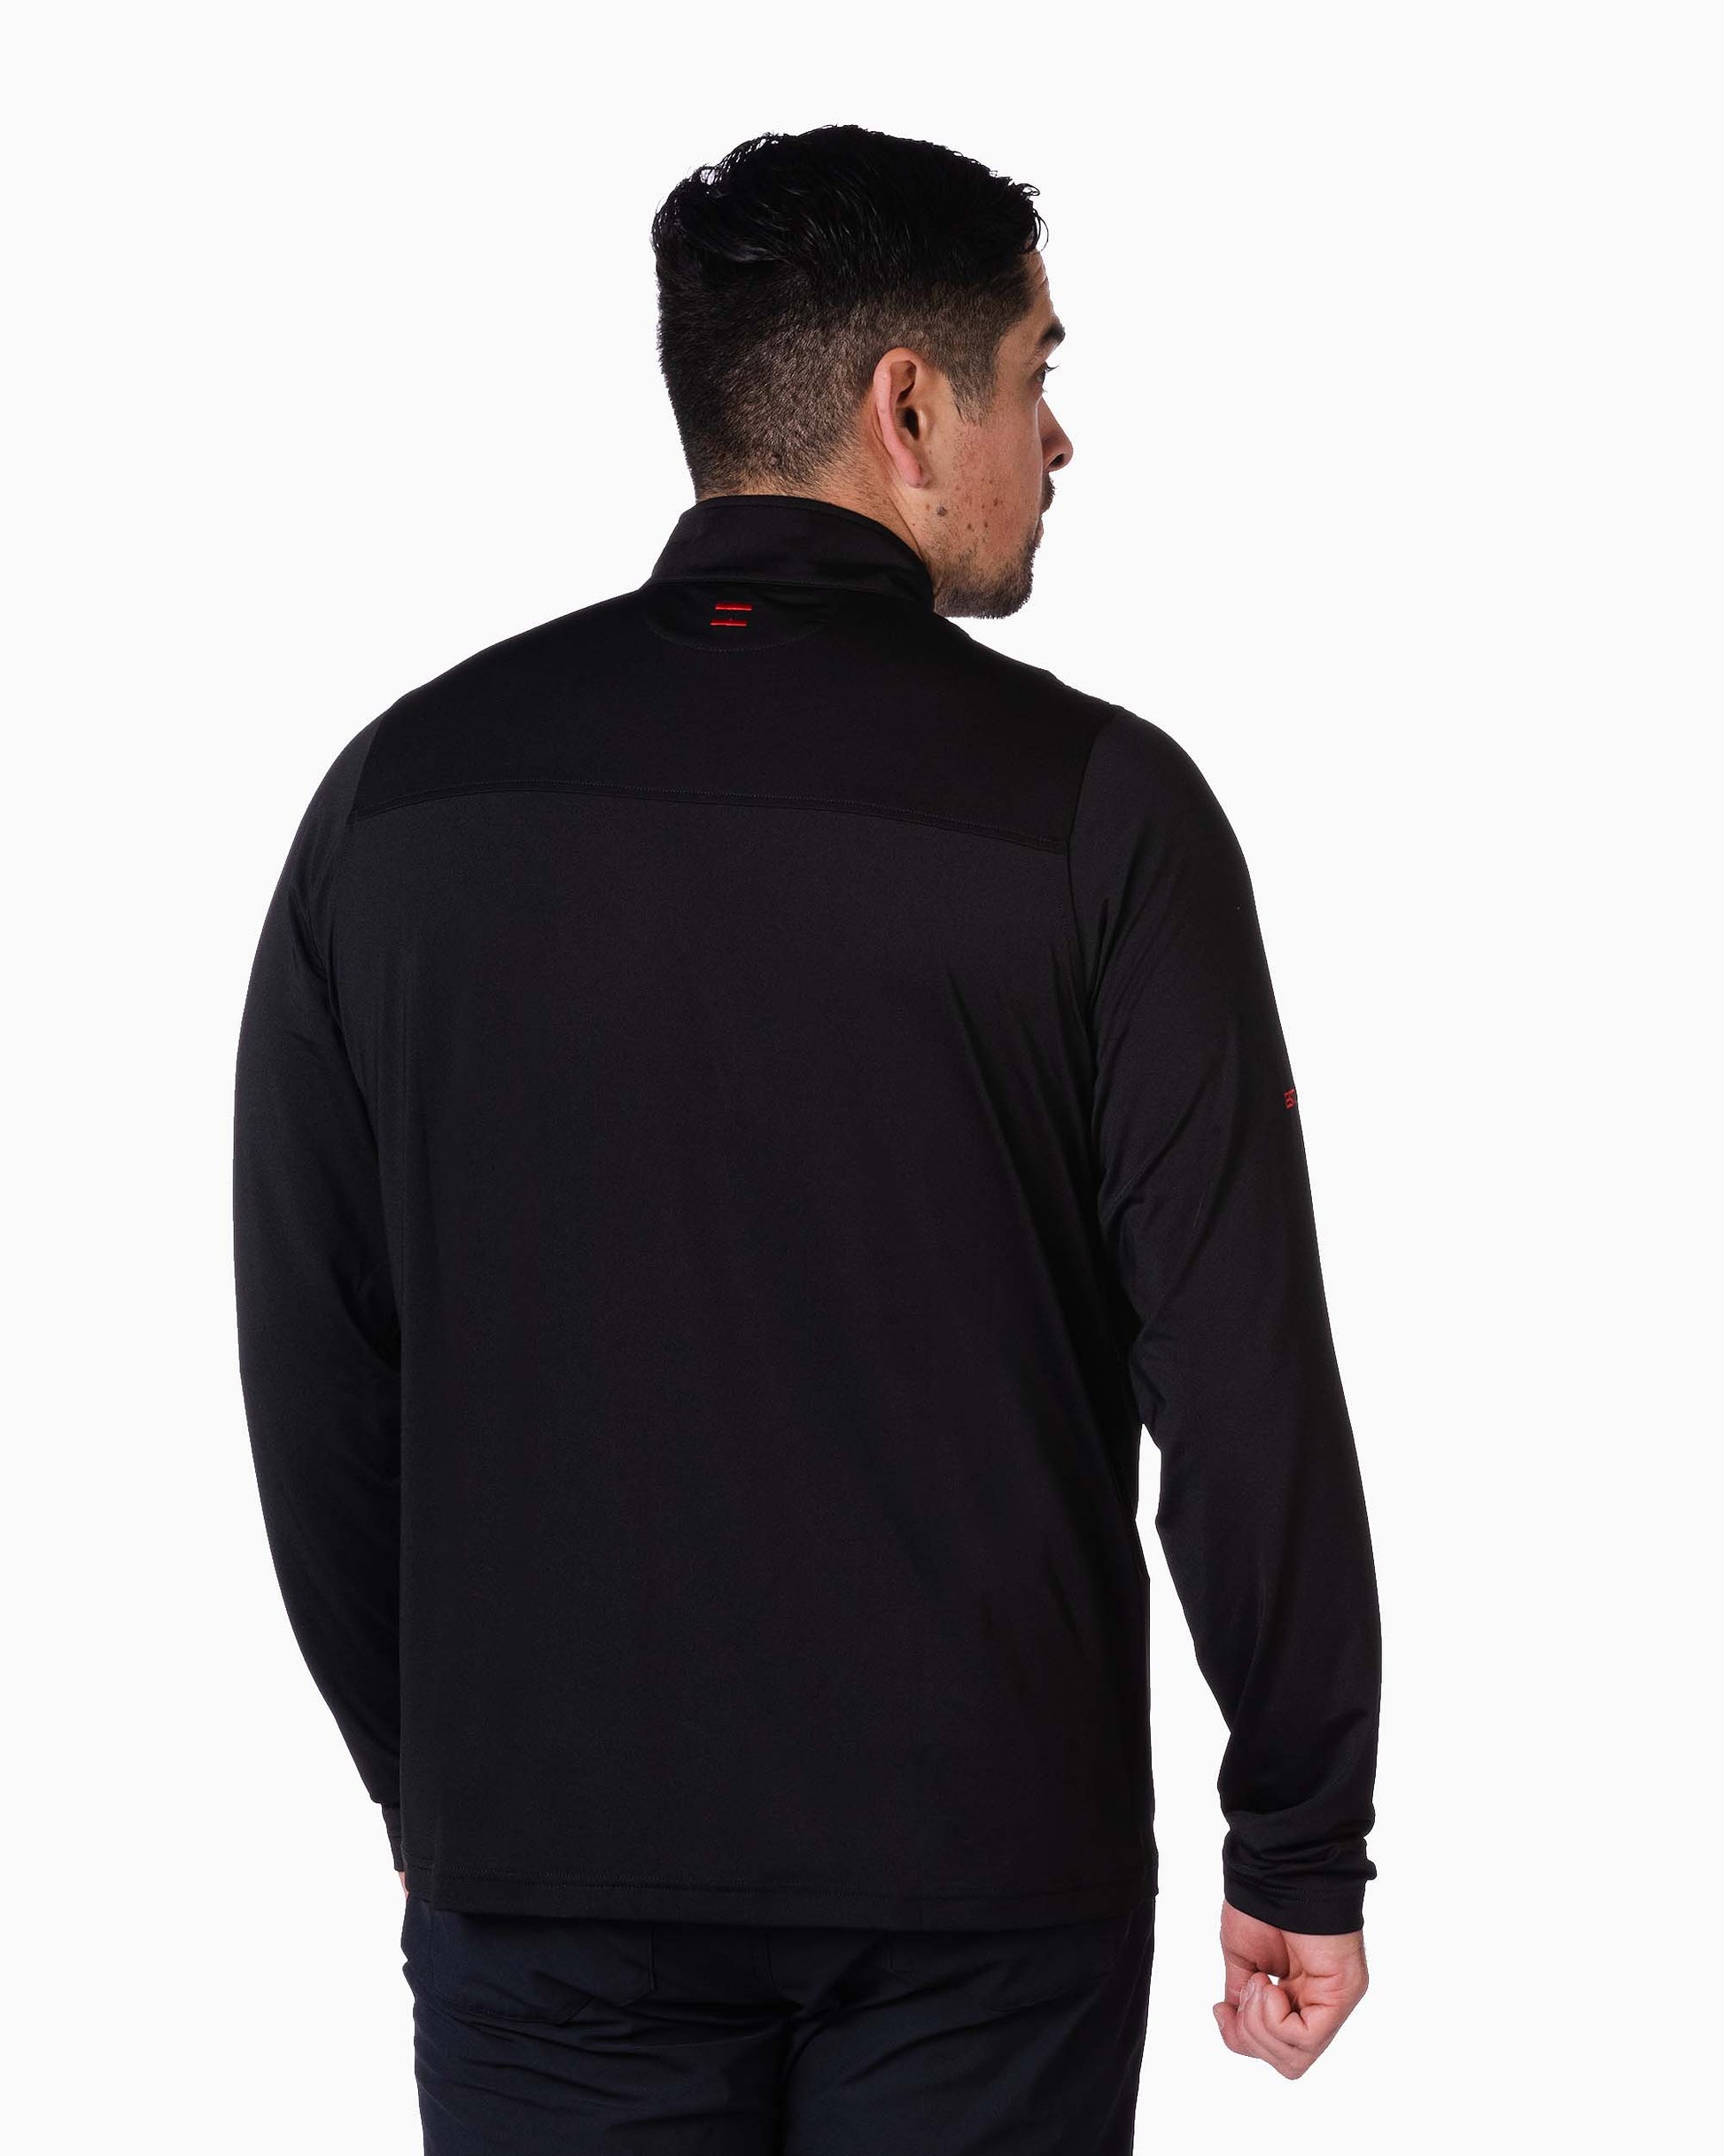 back of man wearing quarter zip with two red woven stripes on neck